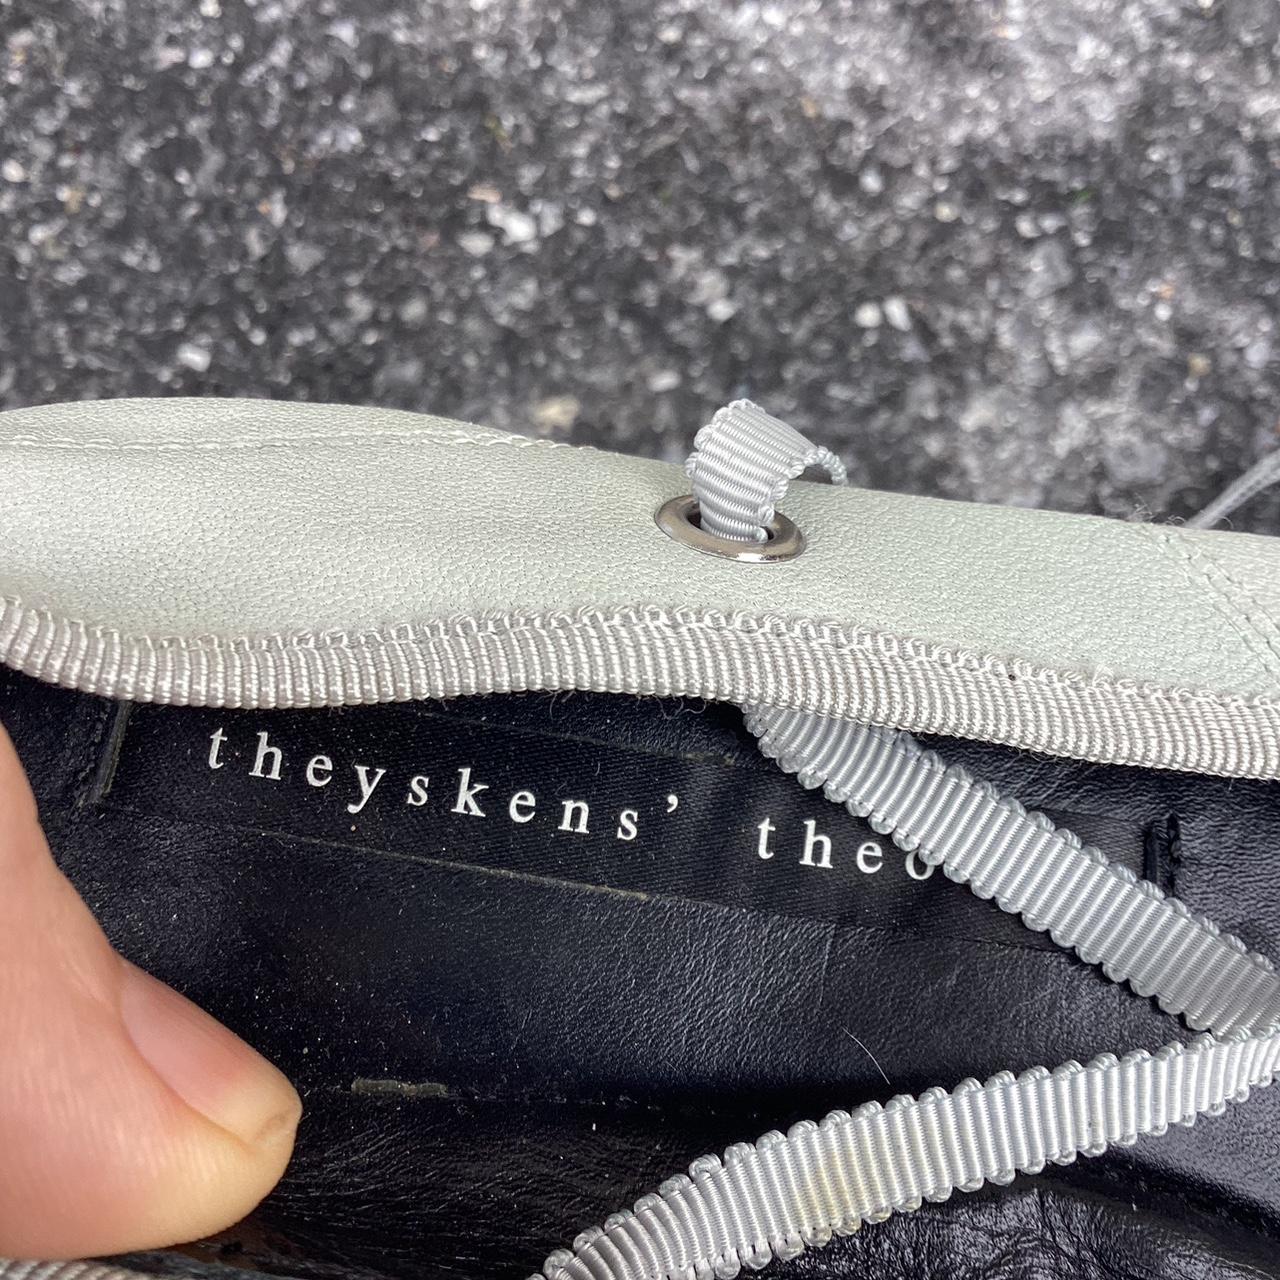 Theyskens' Theory Leather Ballet Flat Shoes Womens... - Depop